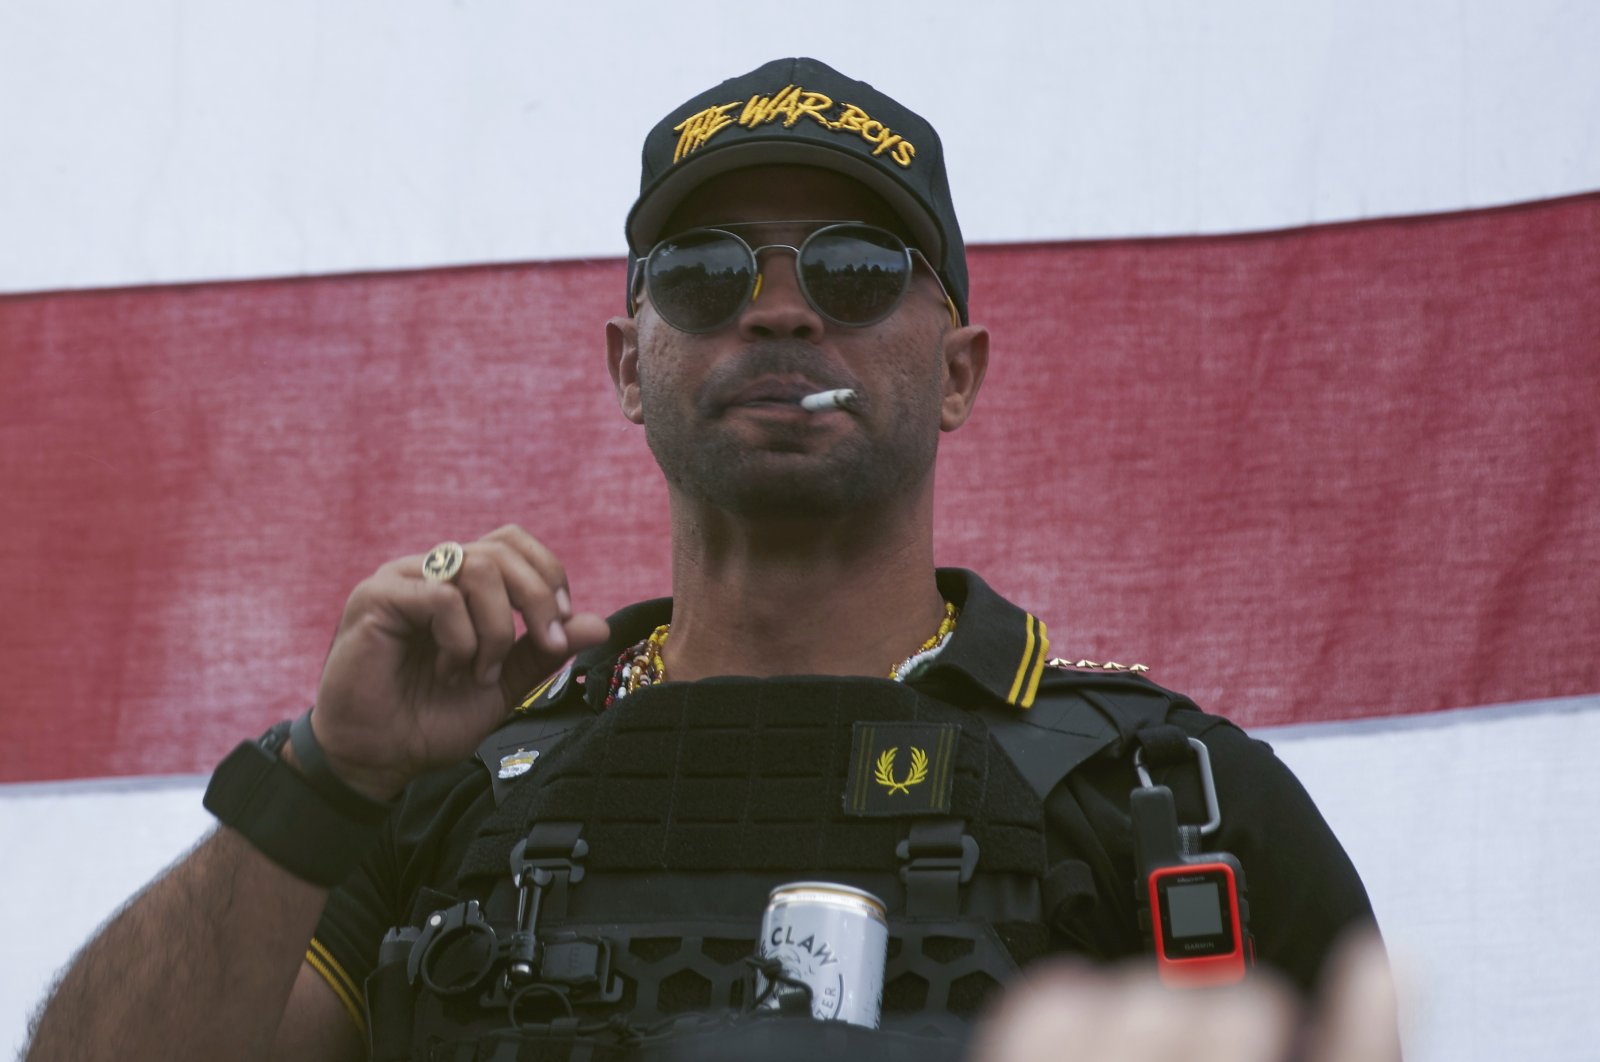 Proud Boys leader Henry "Enrique" Tarrio wears a hat that says "The War Boys" during a rally in Portland, Oregon, Sept. 26, 2020. (AP Photo)